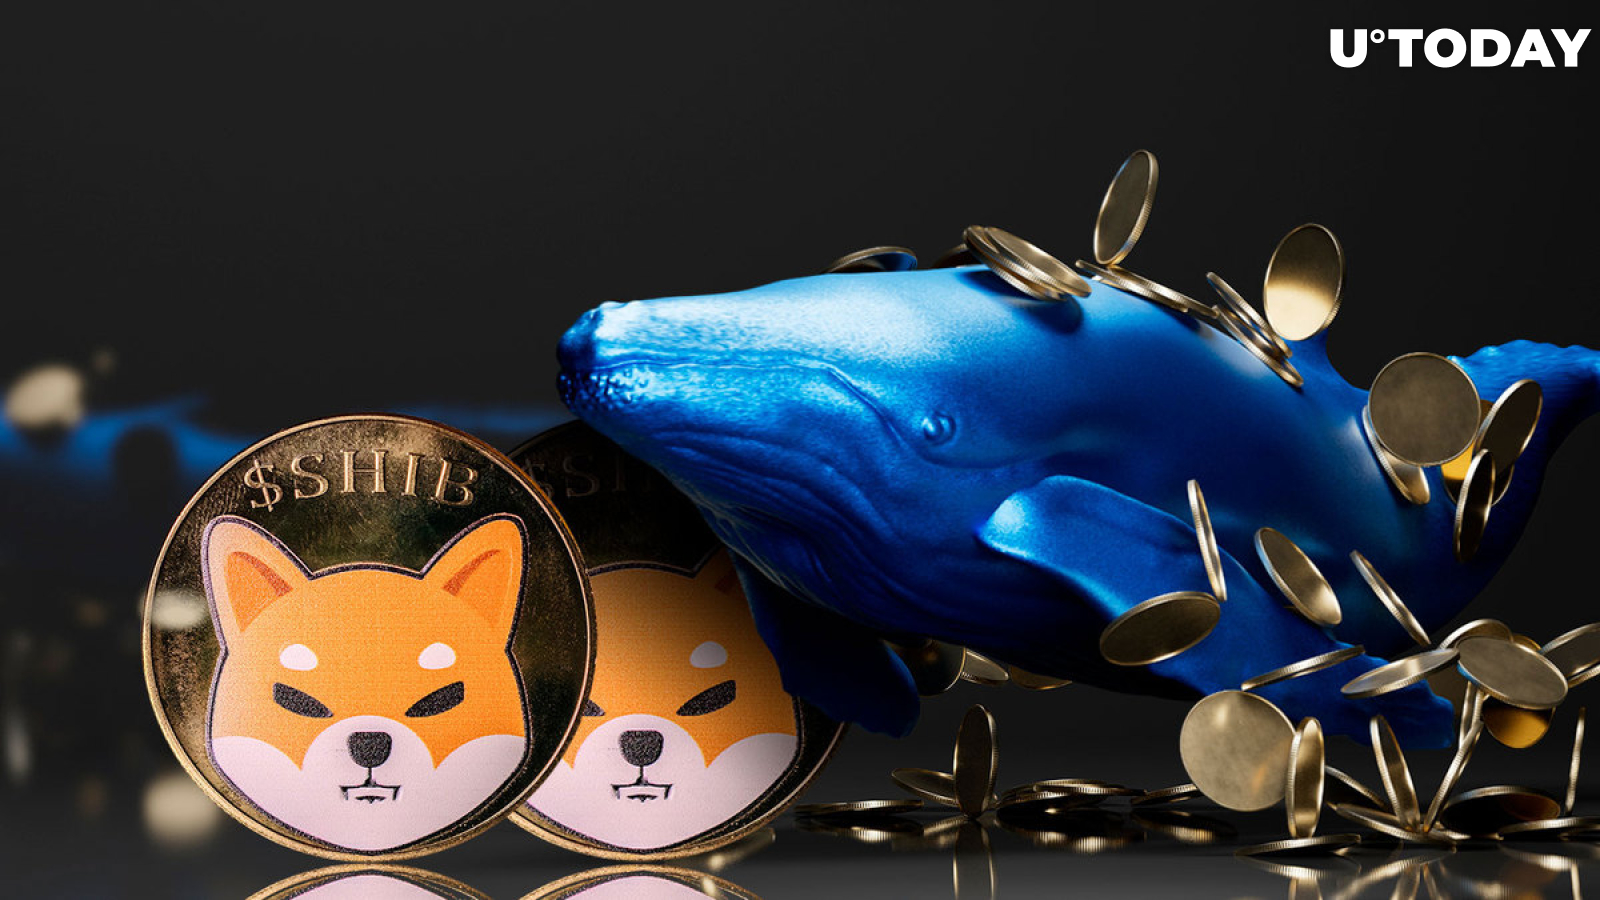 300 Billion Shiba Inu (SHIB) Received by Anonymous Whales: Who Is It?